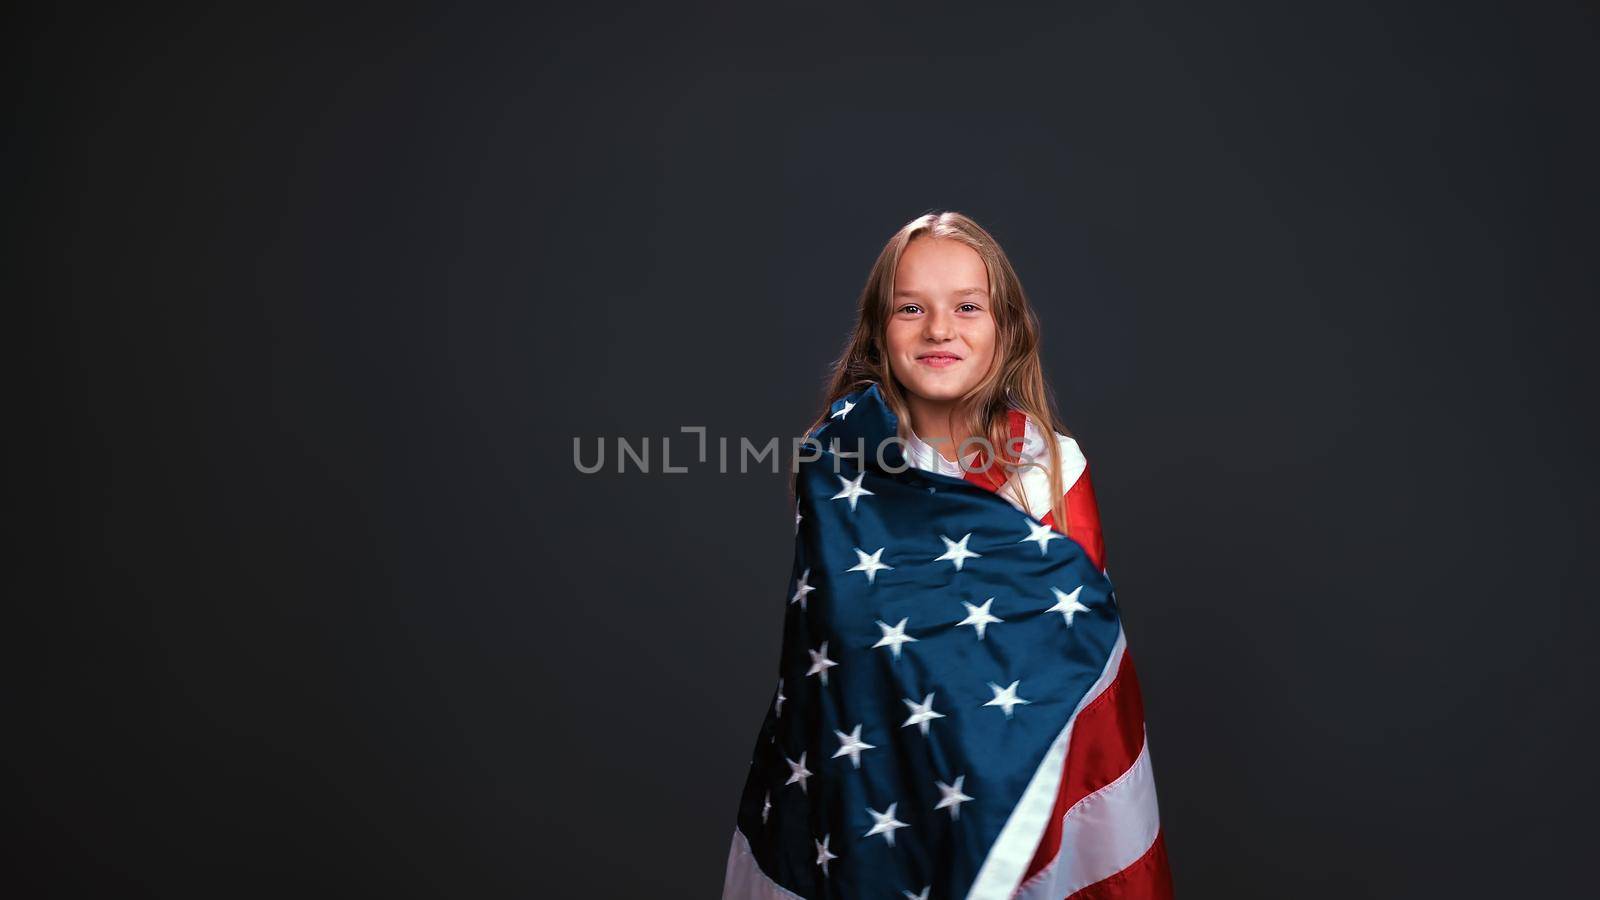 Little girl patriot wrapped in a USA flag celebrates independence day expresses patriotism isolated on black background by LipikStockMedia